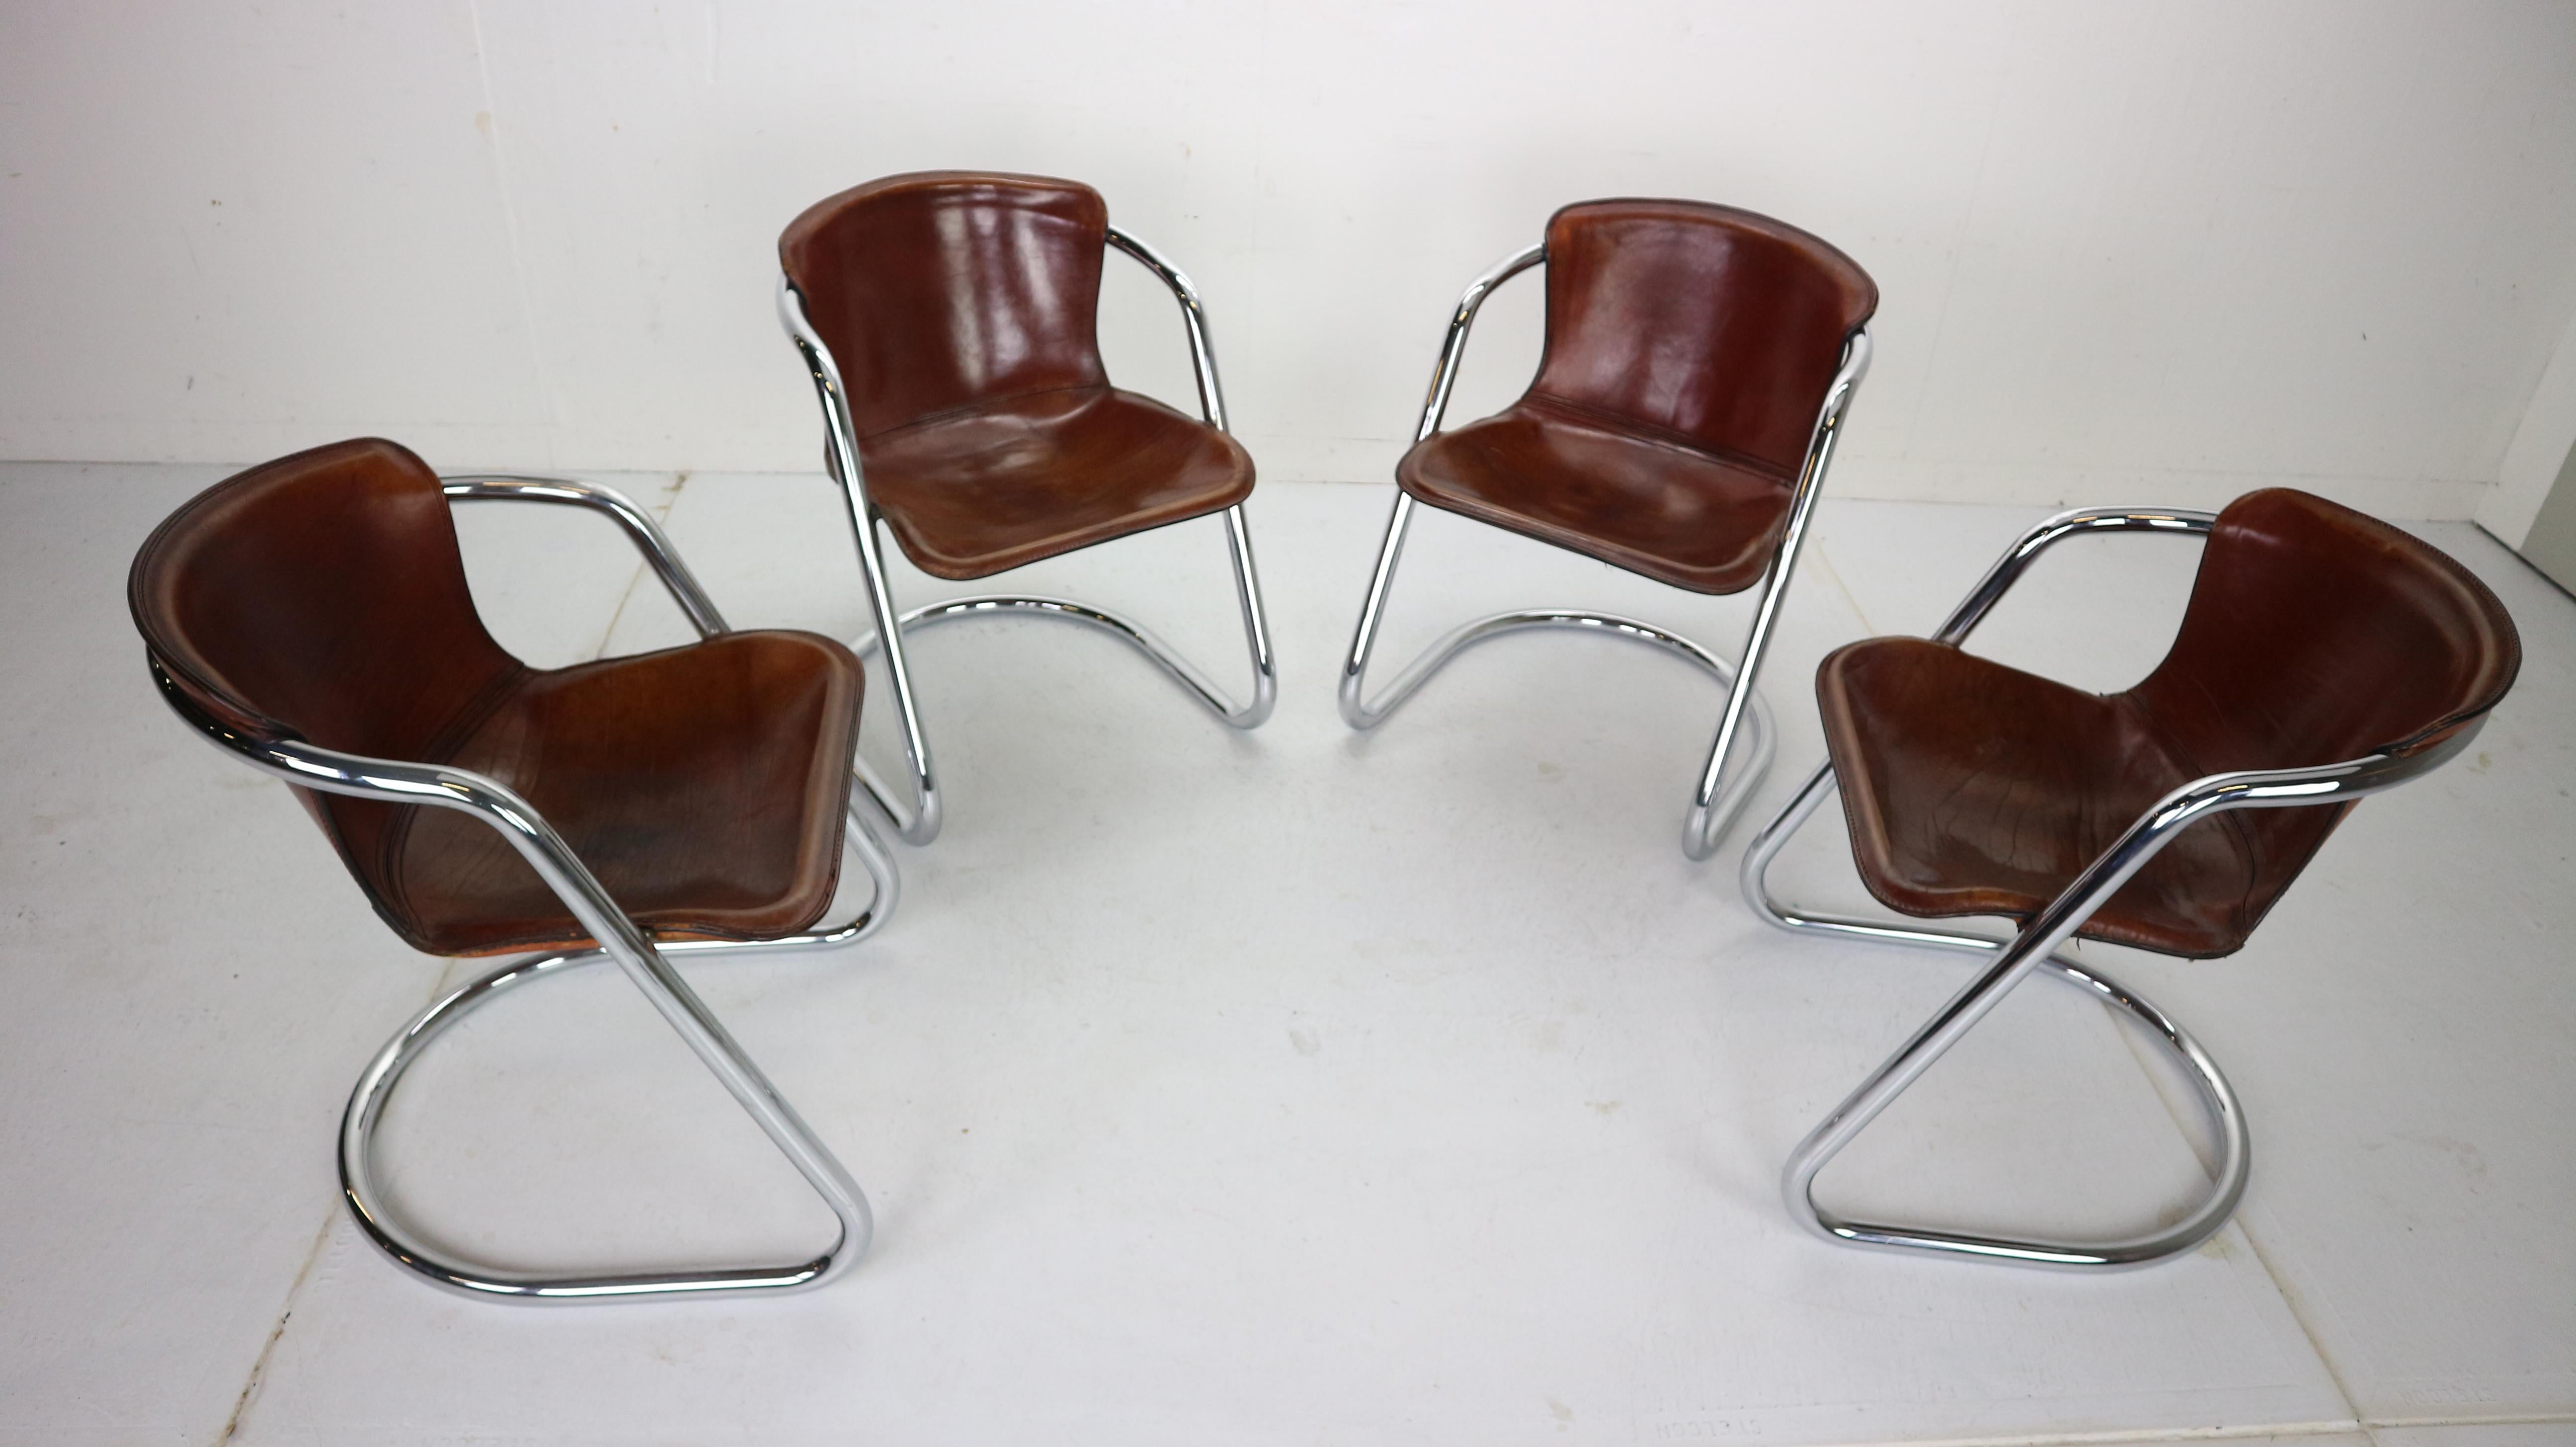 Set of 4 Mid-Century Modern tubular chrome dining chairs by Willy Rizzo, produced by Cidue, Italy, 1970s.
The chrome tubular frame holds thick brown saddle leather seats which are in great vintage condition.
Two frames are professionally repaired